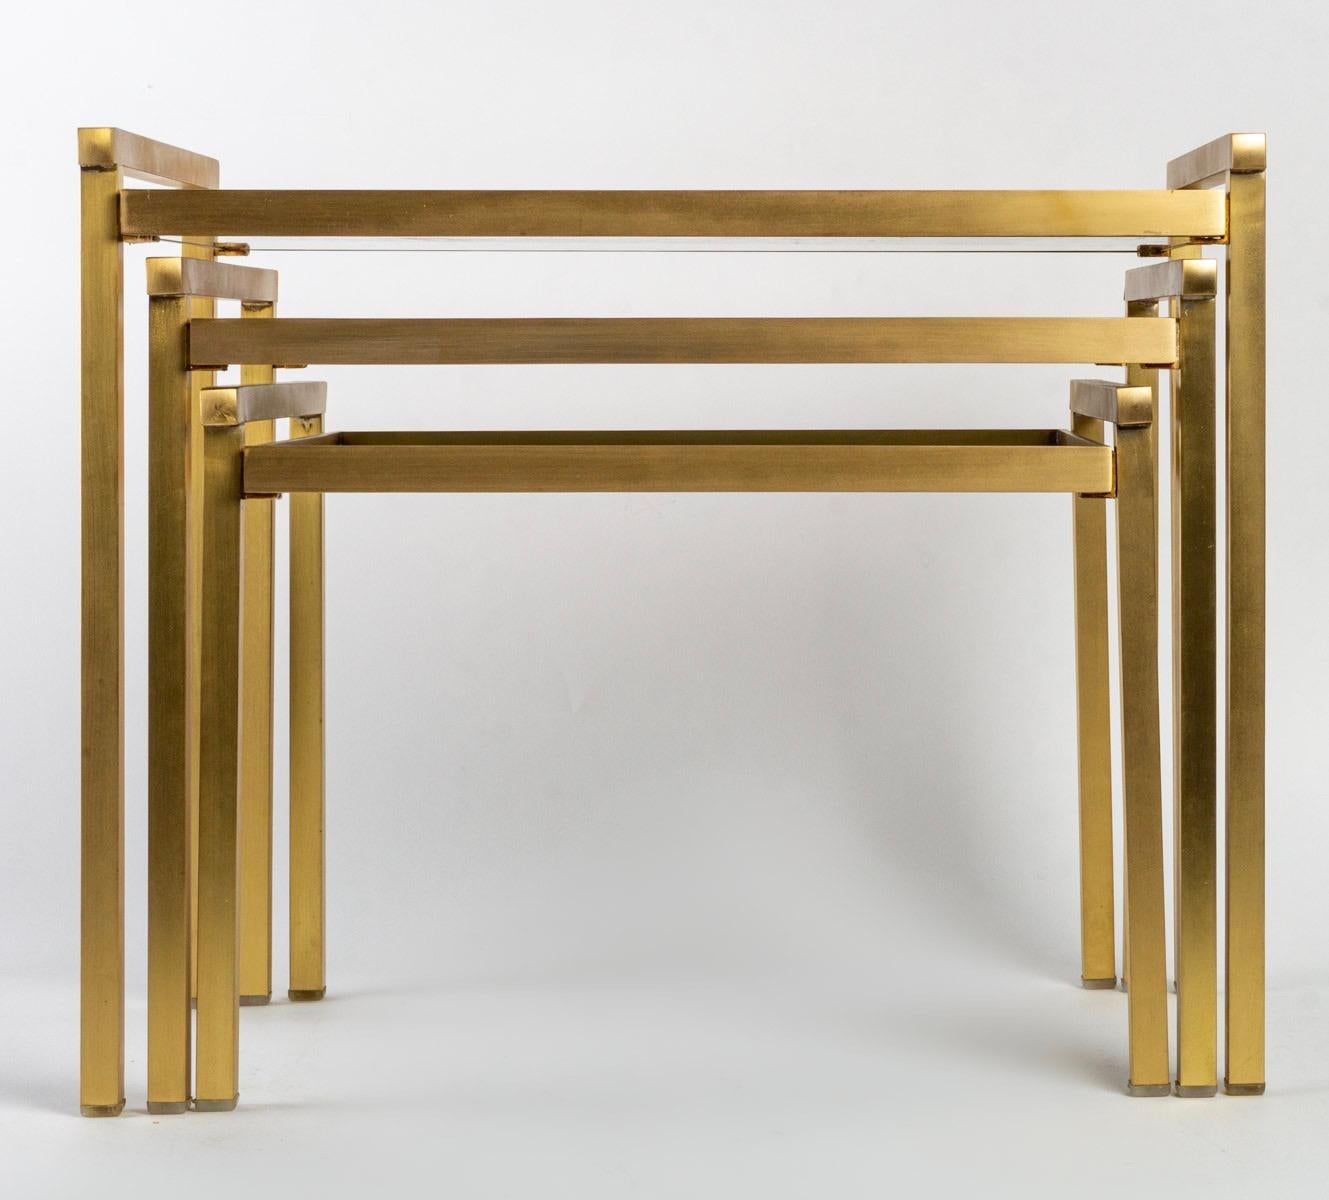 The nesting tables are composed of a set of small light tables that fit into each other in order to save space. 
The structure of the tables is in golden brass and the tops are in glass.